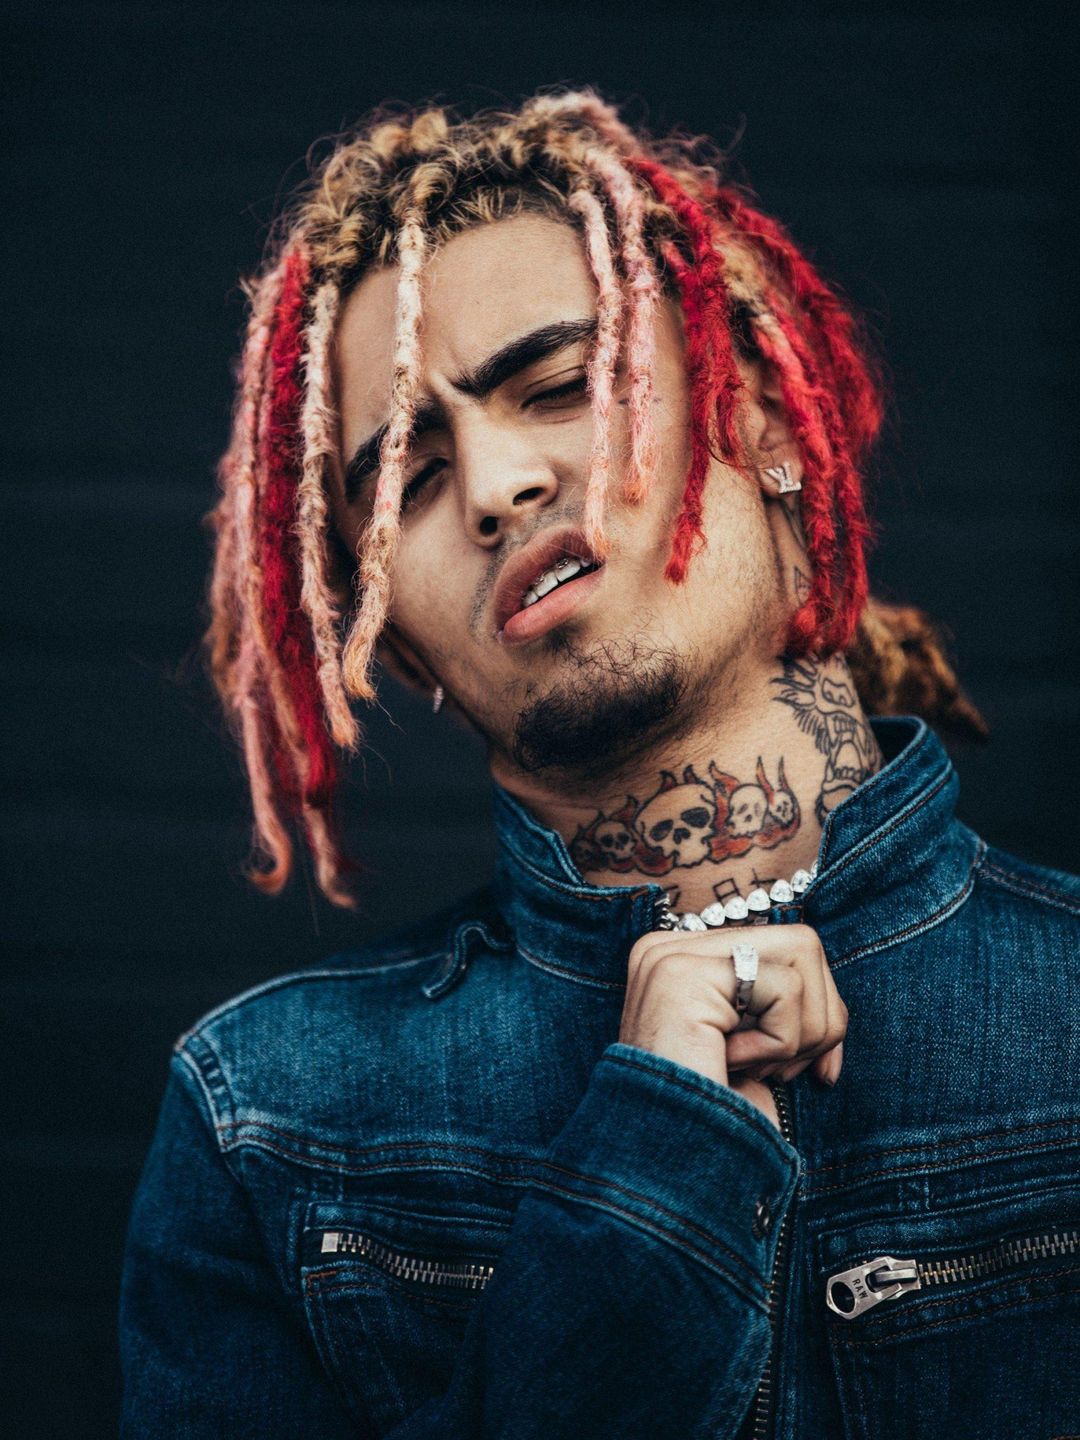 Lil Pump who is his father